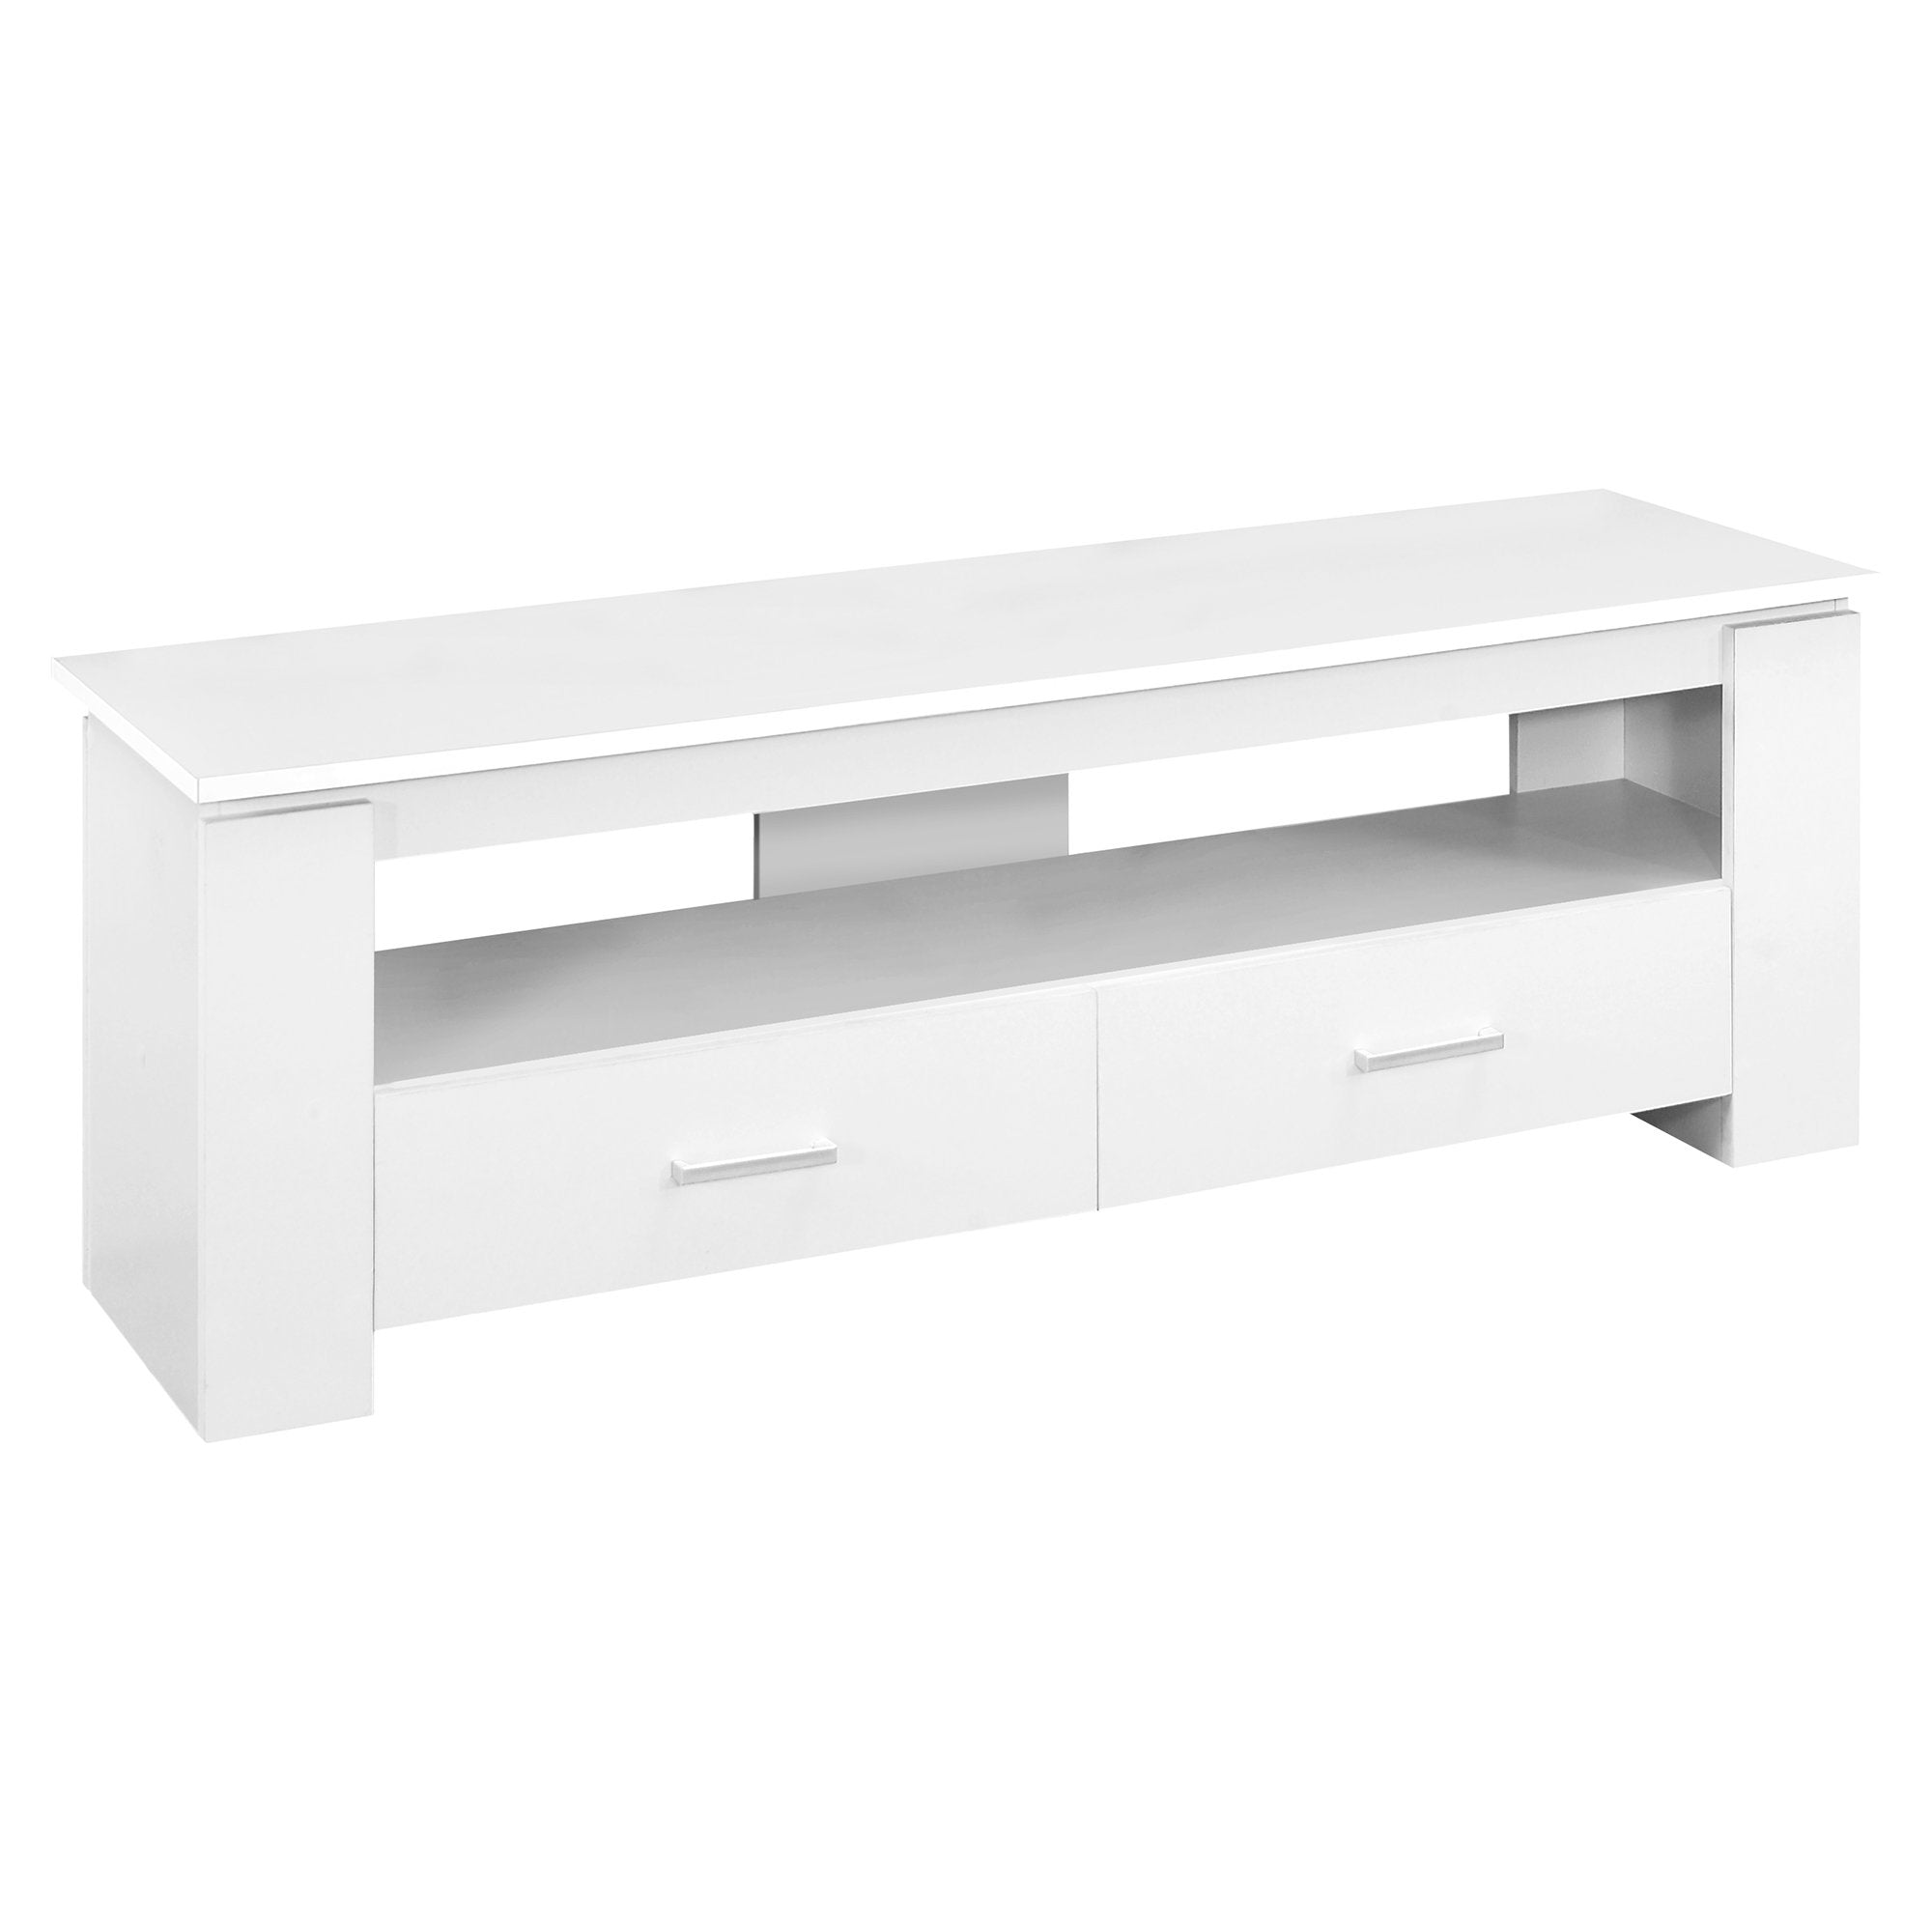 MN-752601    Tv Stand, 48 Inch, Console, Media Entertainment Center, Storage Cabinet, Living Room, Bedroom, Laminate, White, Contemporary, Modern